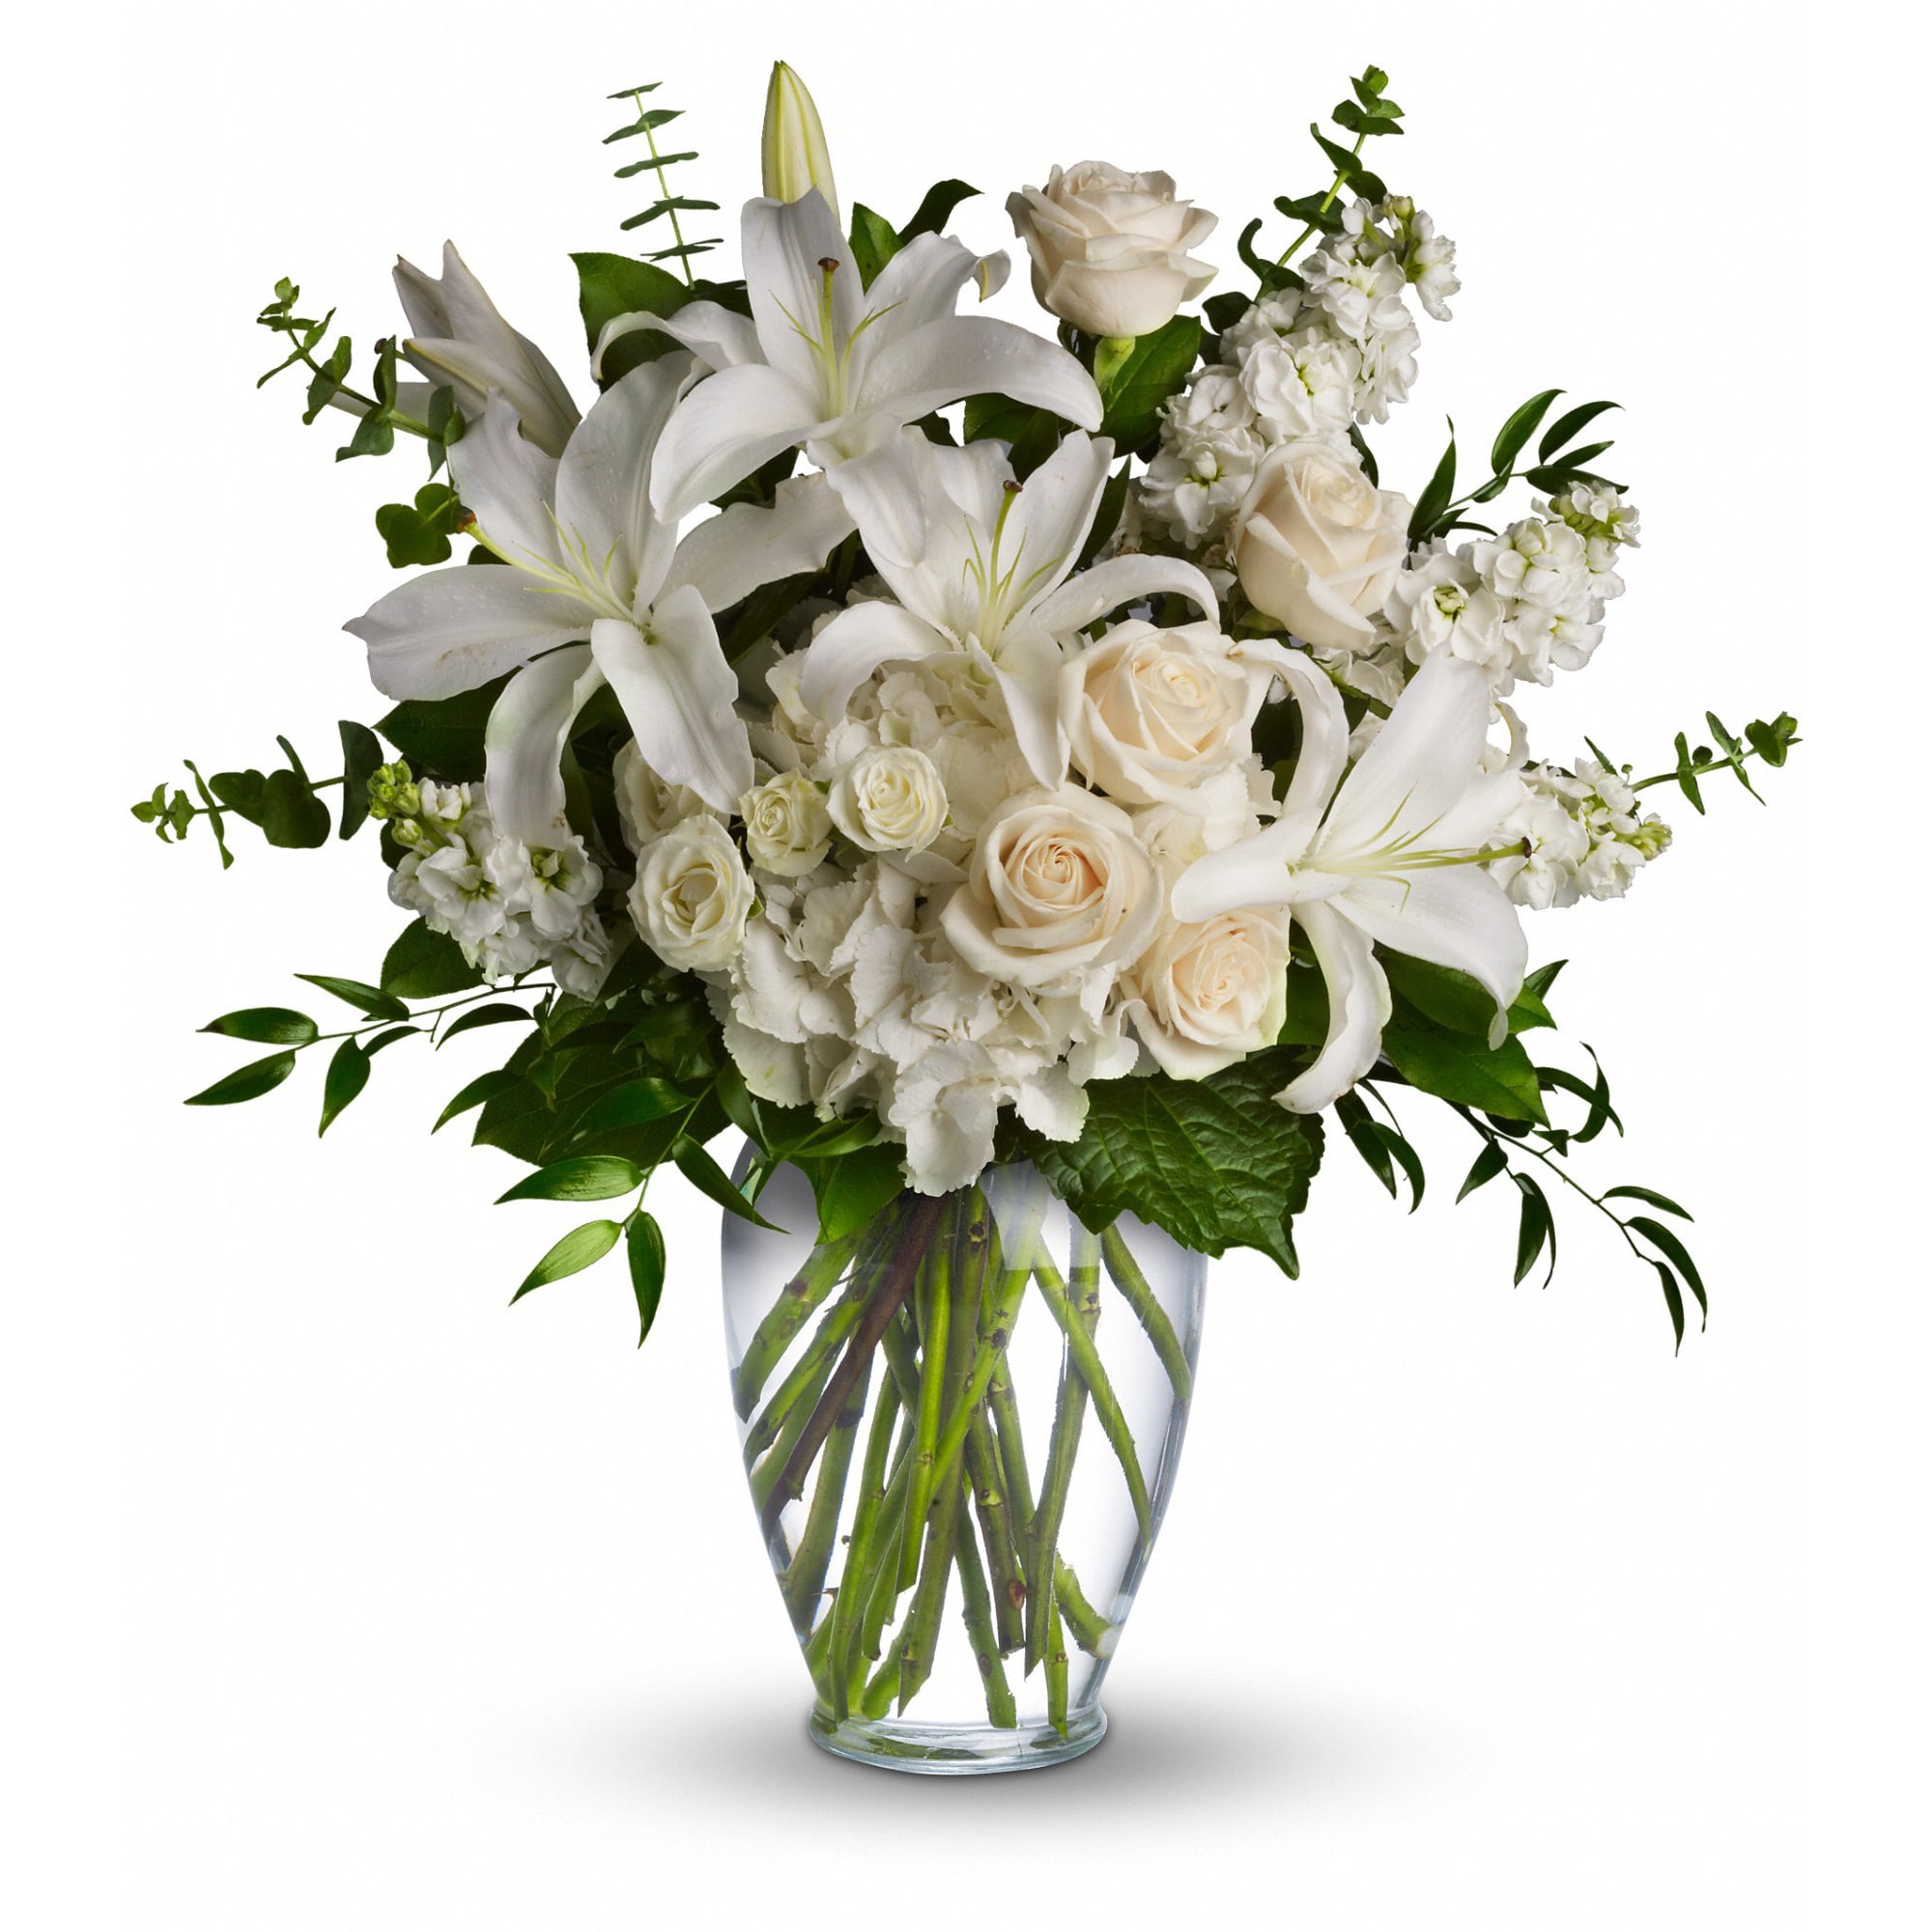 T208-1A Dreams From the Heart Bouquet by Teleflora - A lovely bouquet to soothe and comfort, a variety of white and peach blossoms sends your hope and strength. Beautifully.  Beautiful flowers such as white hydrangea, spray roses and stock, peach roses, eucalyptus and more fill a tall glass vase.  Approximately 24&quot; W x 24 1/2&quot; H  Orientation: One-Sided      As Shown : T208-1A     Deluxe : T208-1B     Premium : T208-1C   